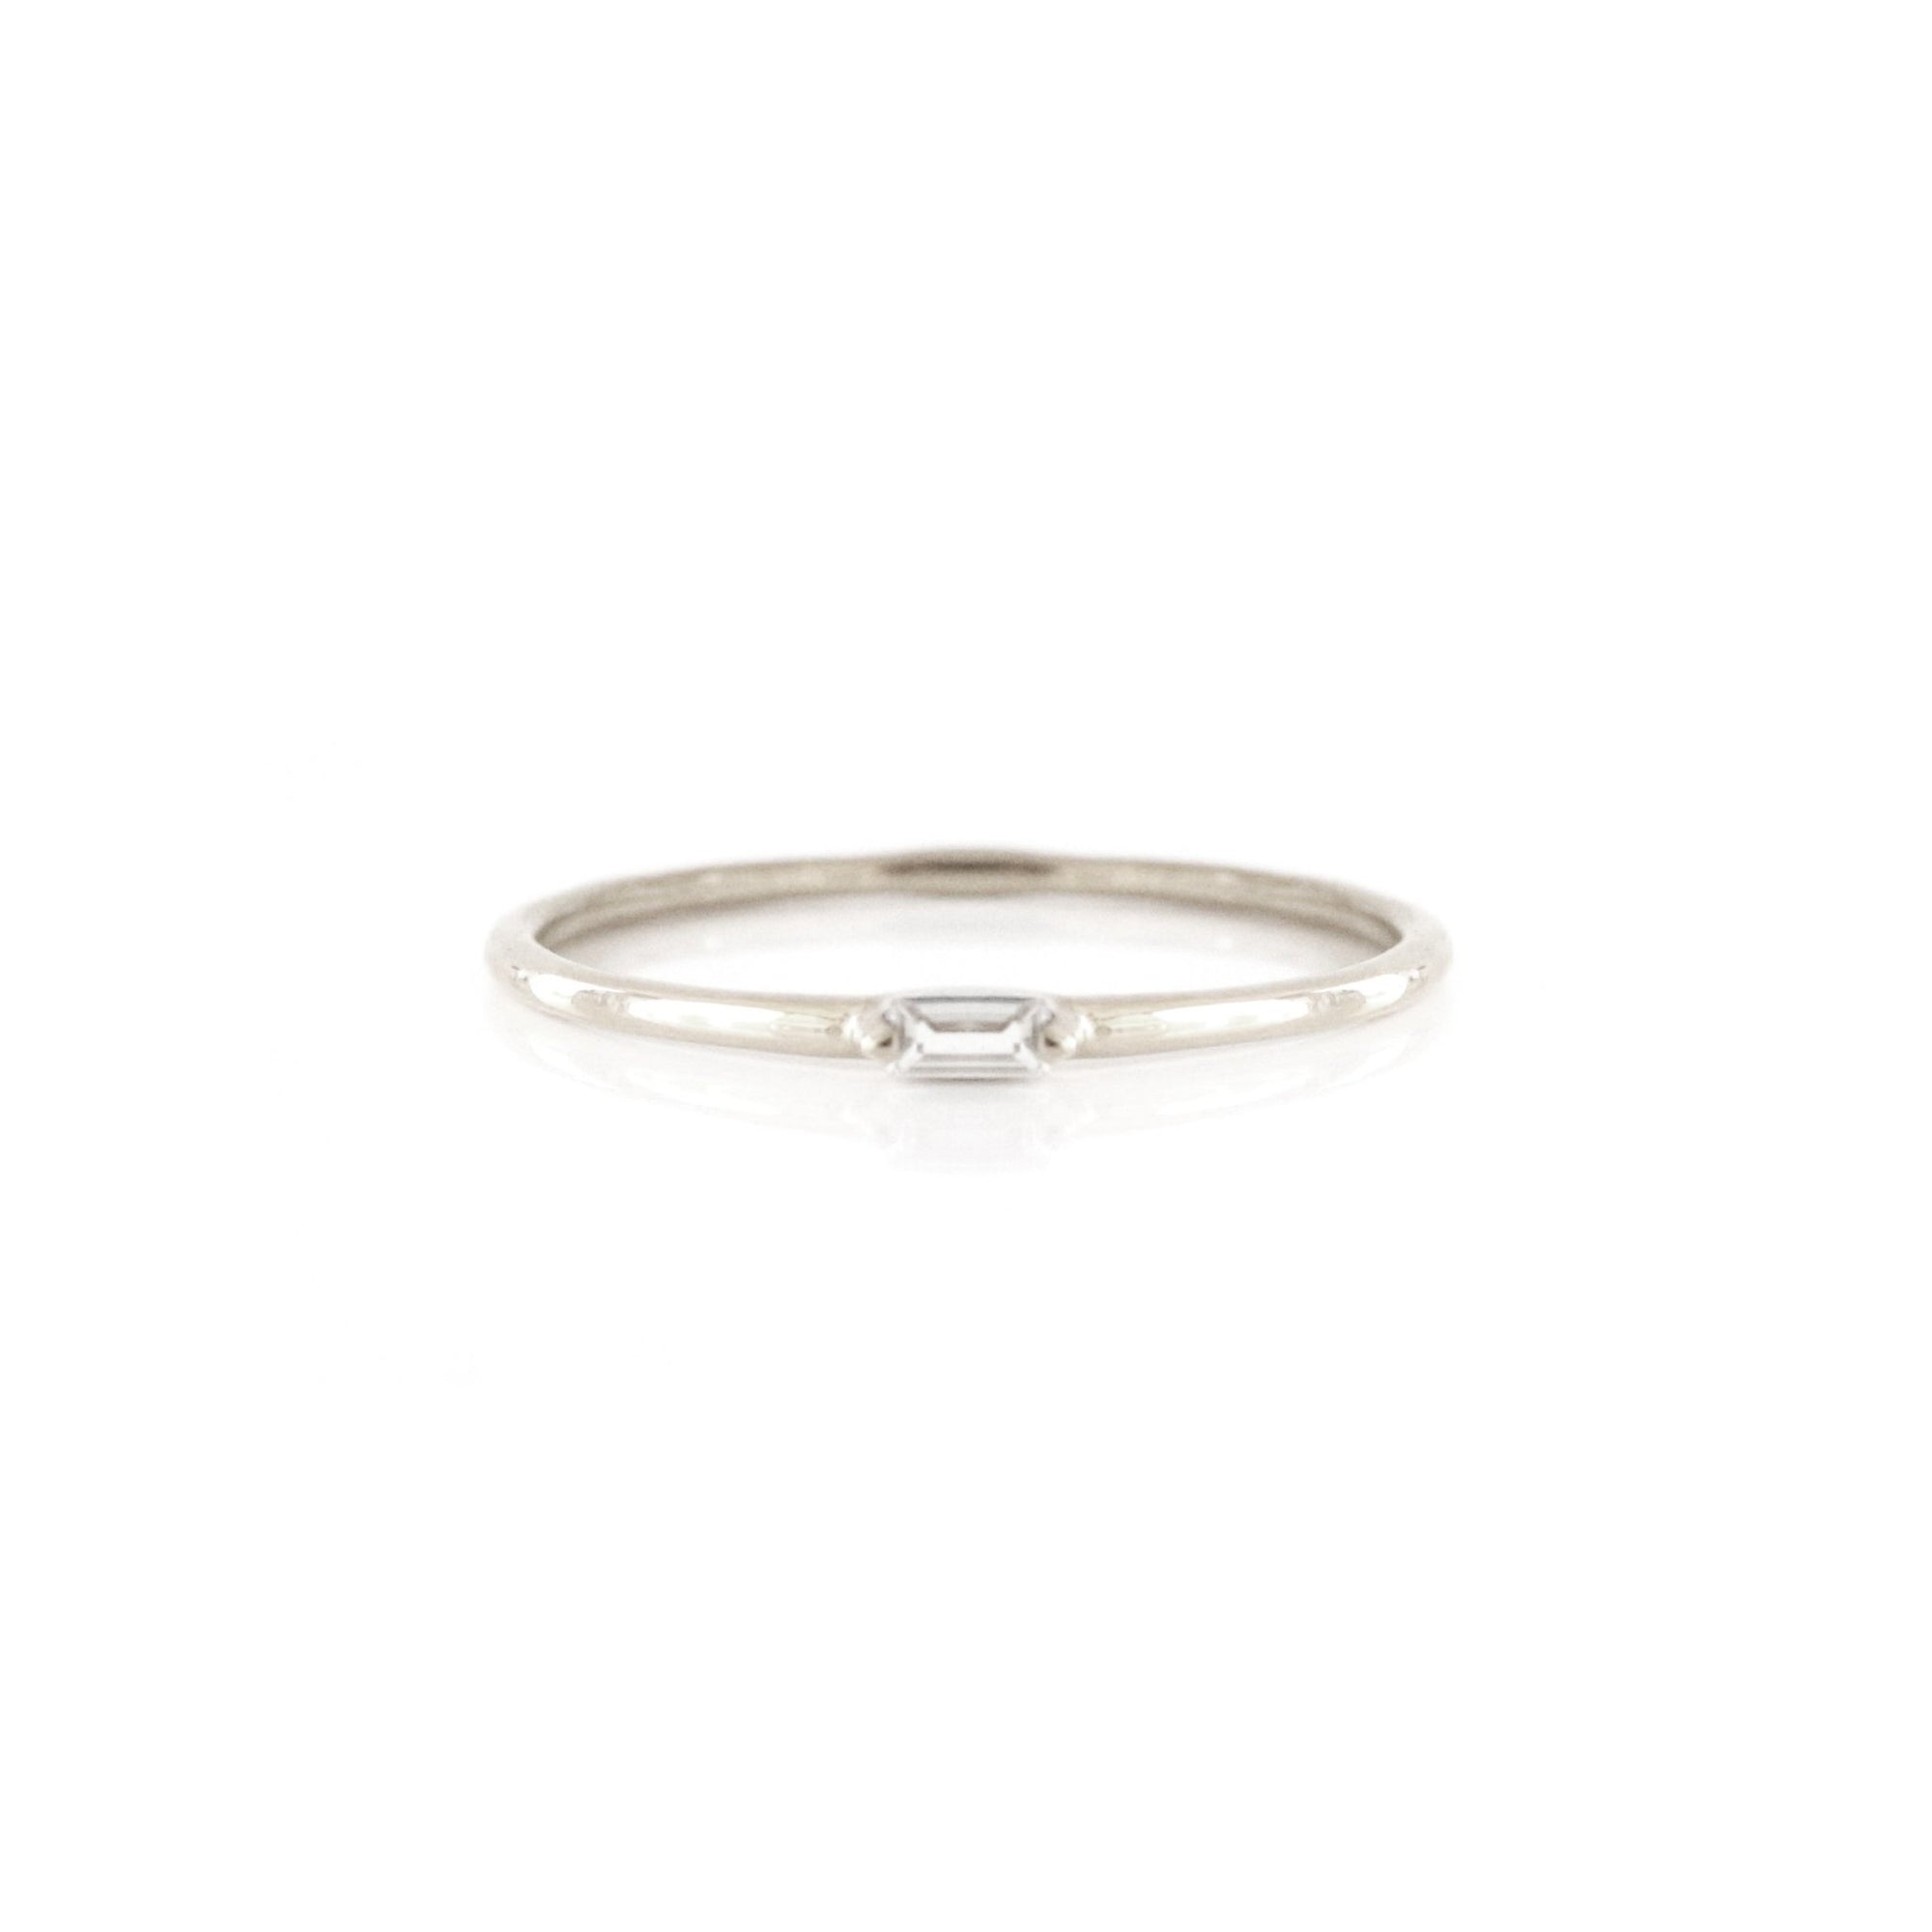 Loyal Solitaire Stacking Ring - White Topaz & Silver - SO PRETTY CARA COTTER